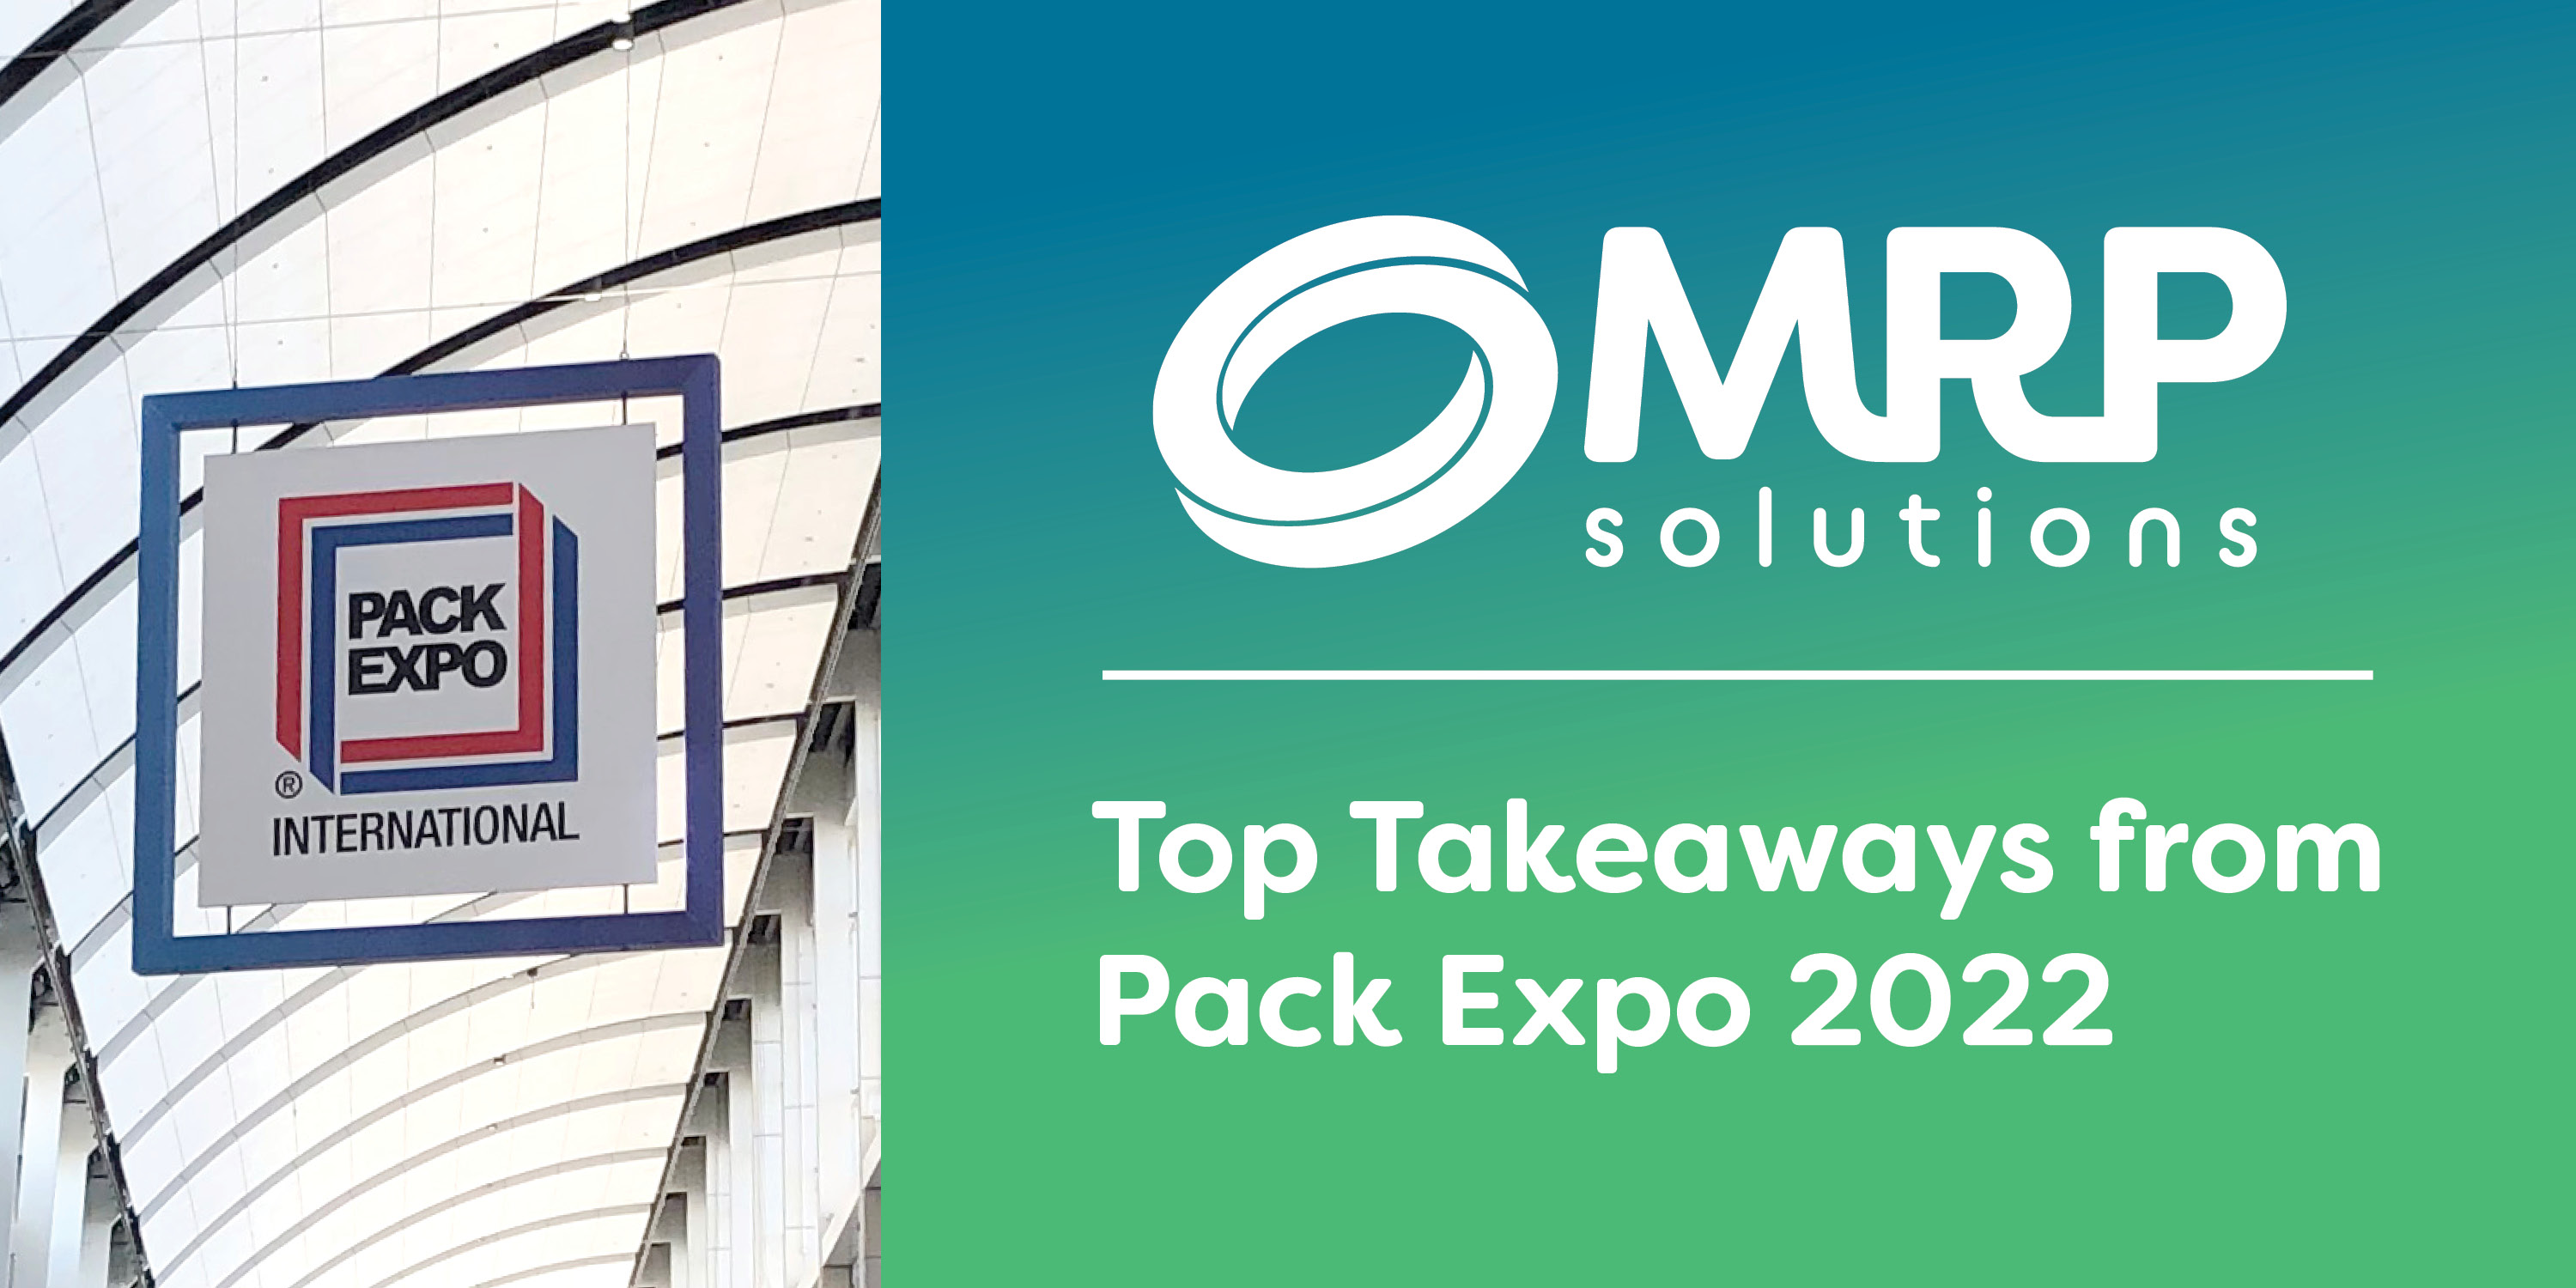 Top Takeaways from Pack Expo 2022